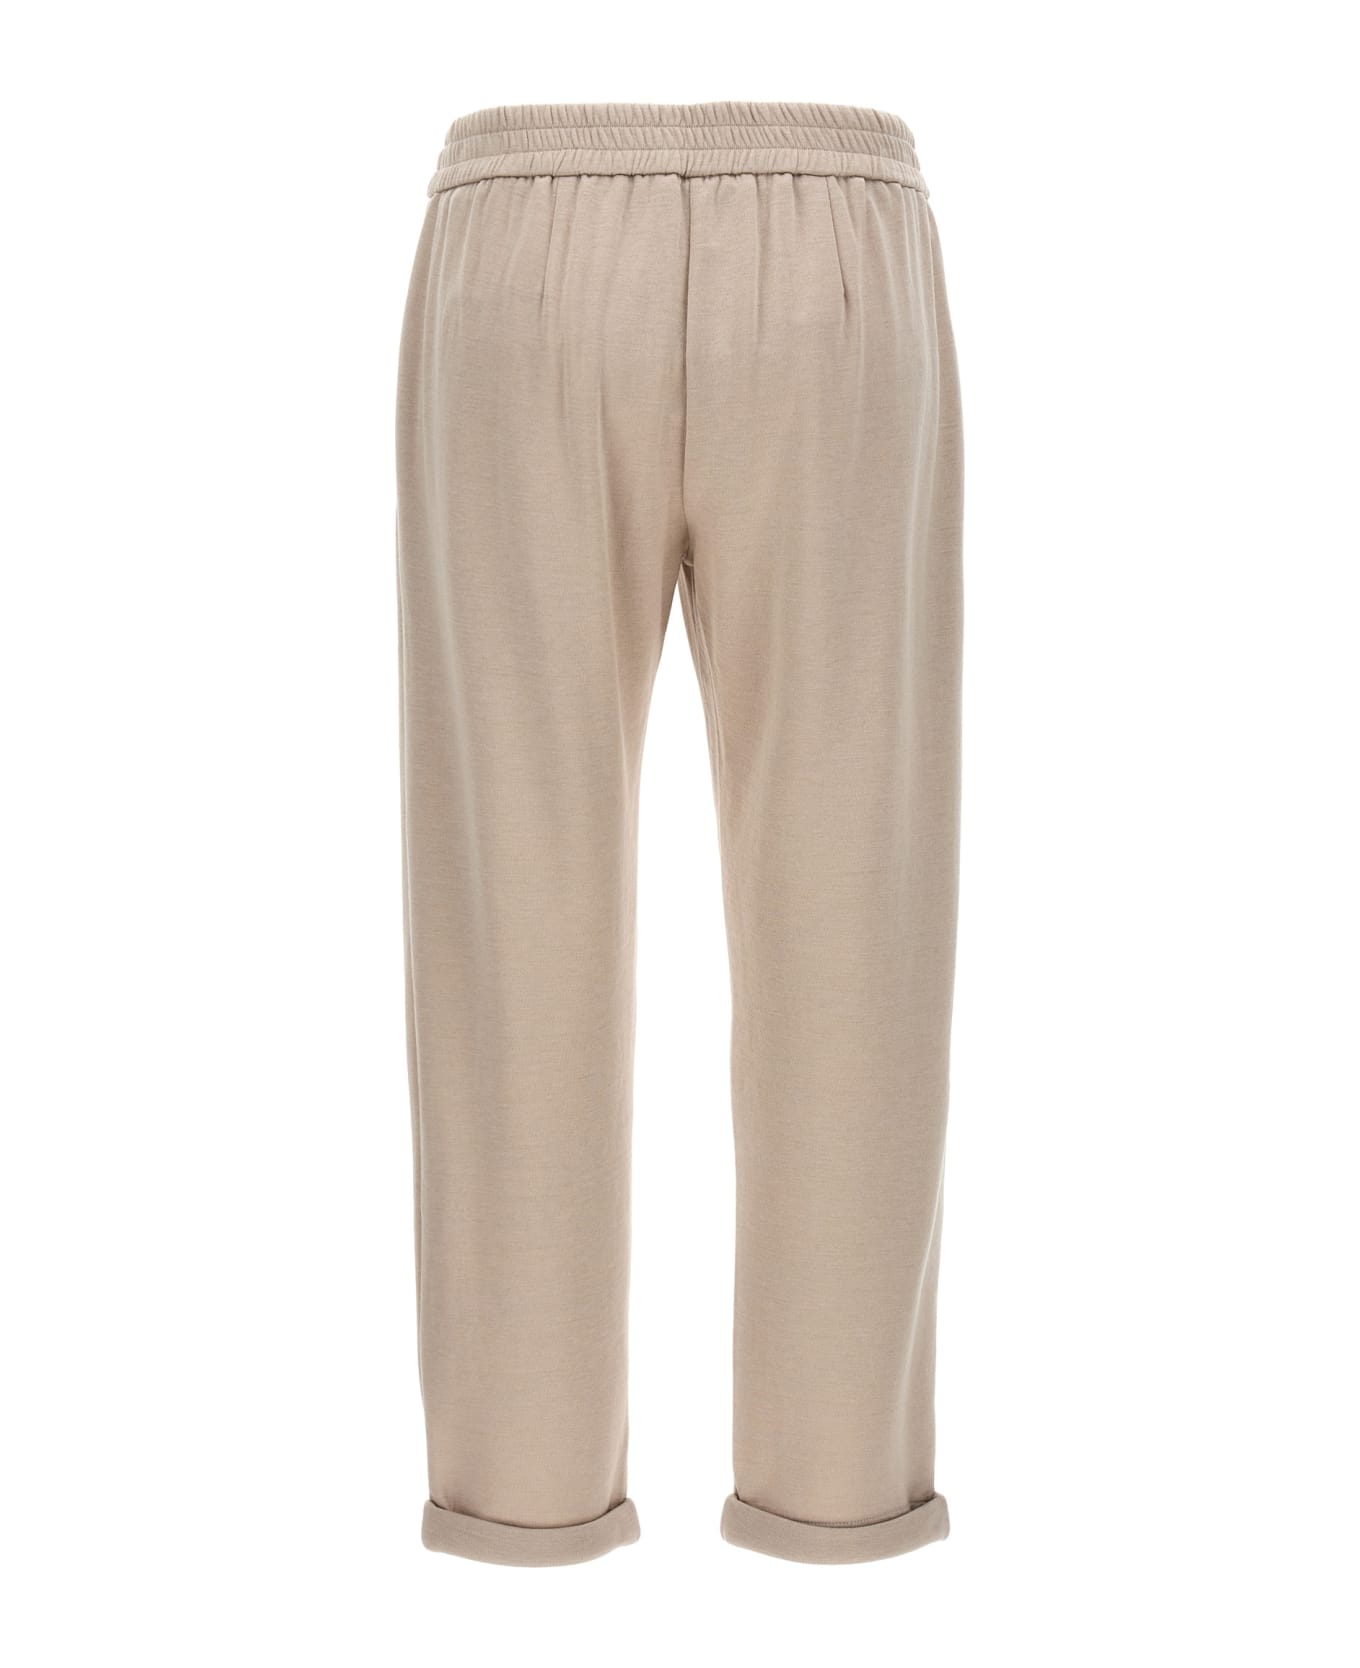 Brunello Cucinelli Pants With Drawstring And Monile Detail - Beige ボトムス